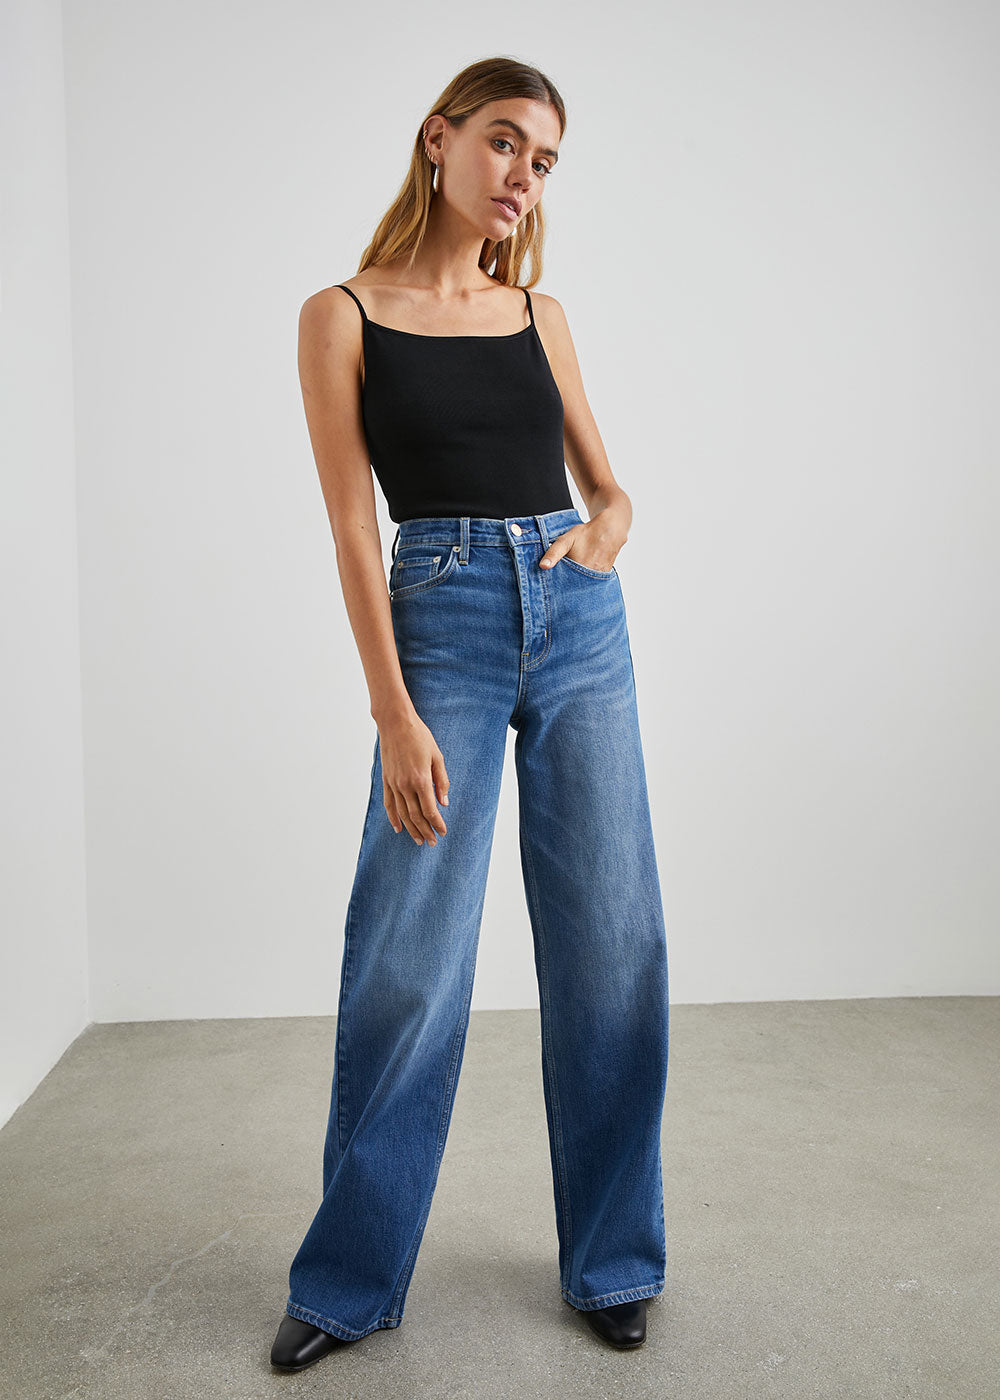 Rails Getty Jeans